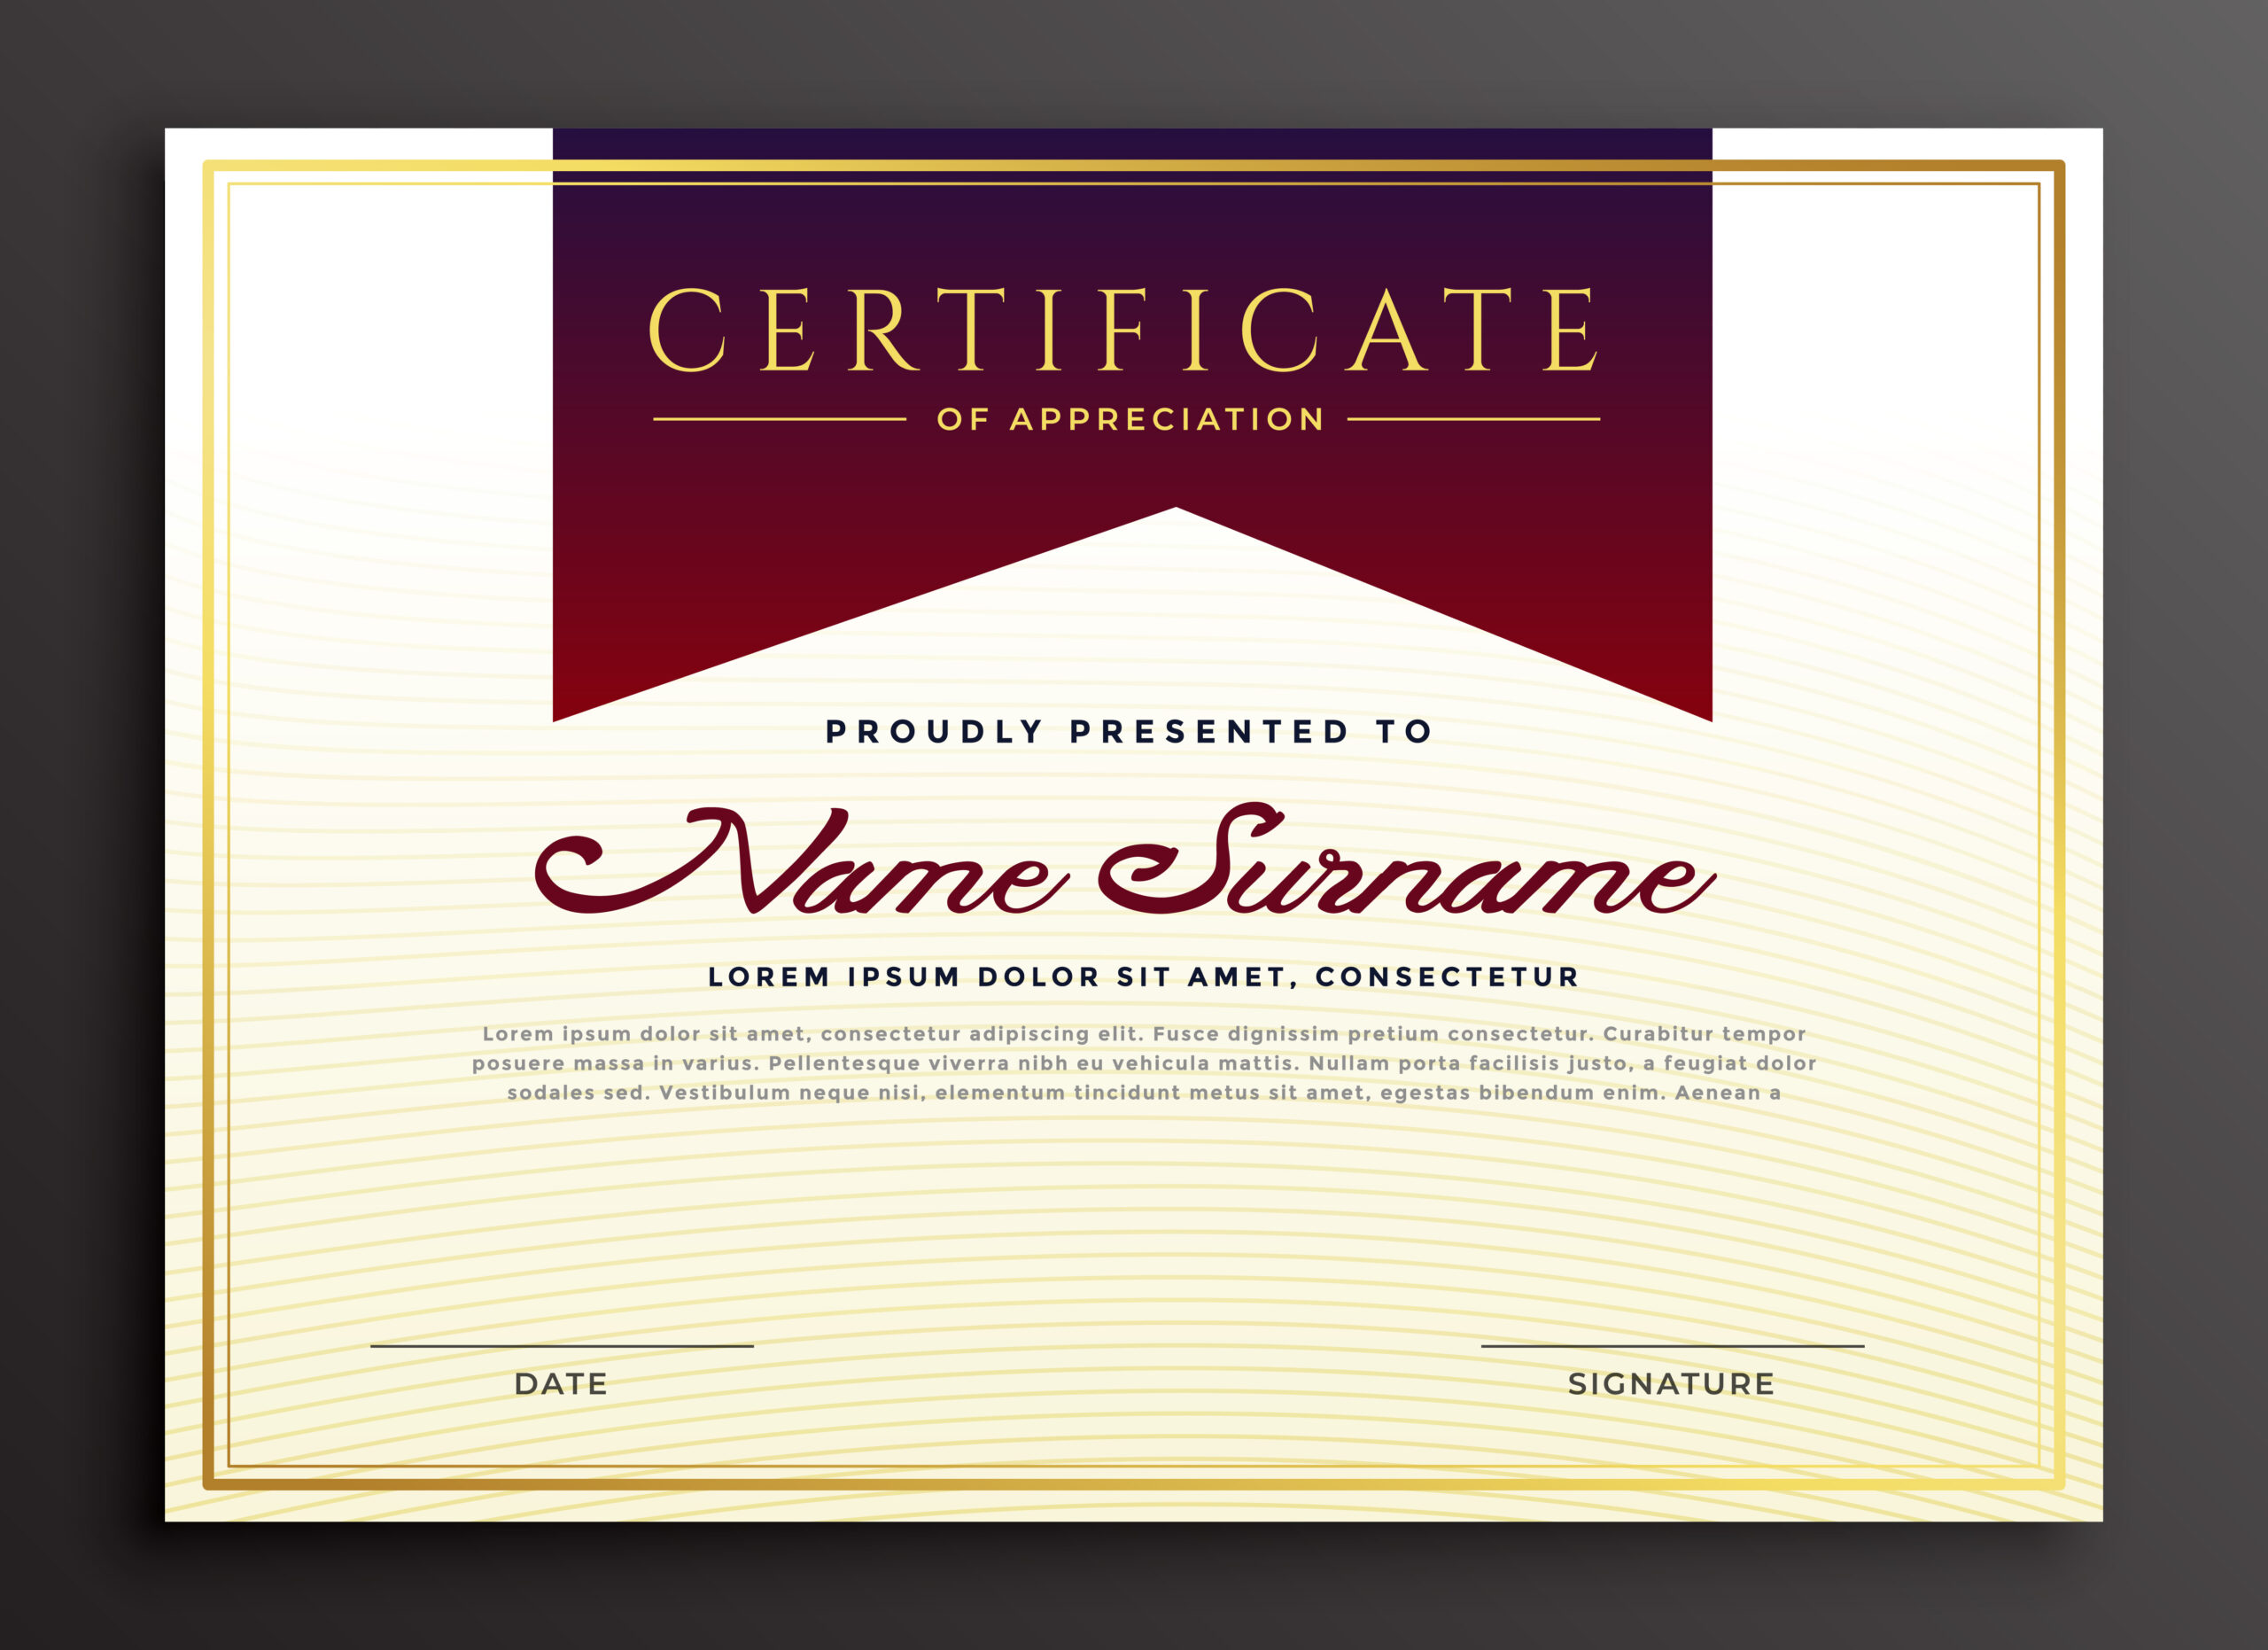 Certificate Of Appreciation Business Template - Download Free Vector inside Template For Recognition Certificate